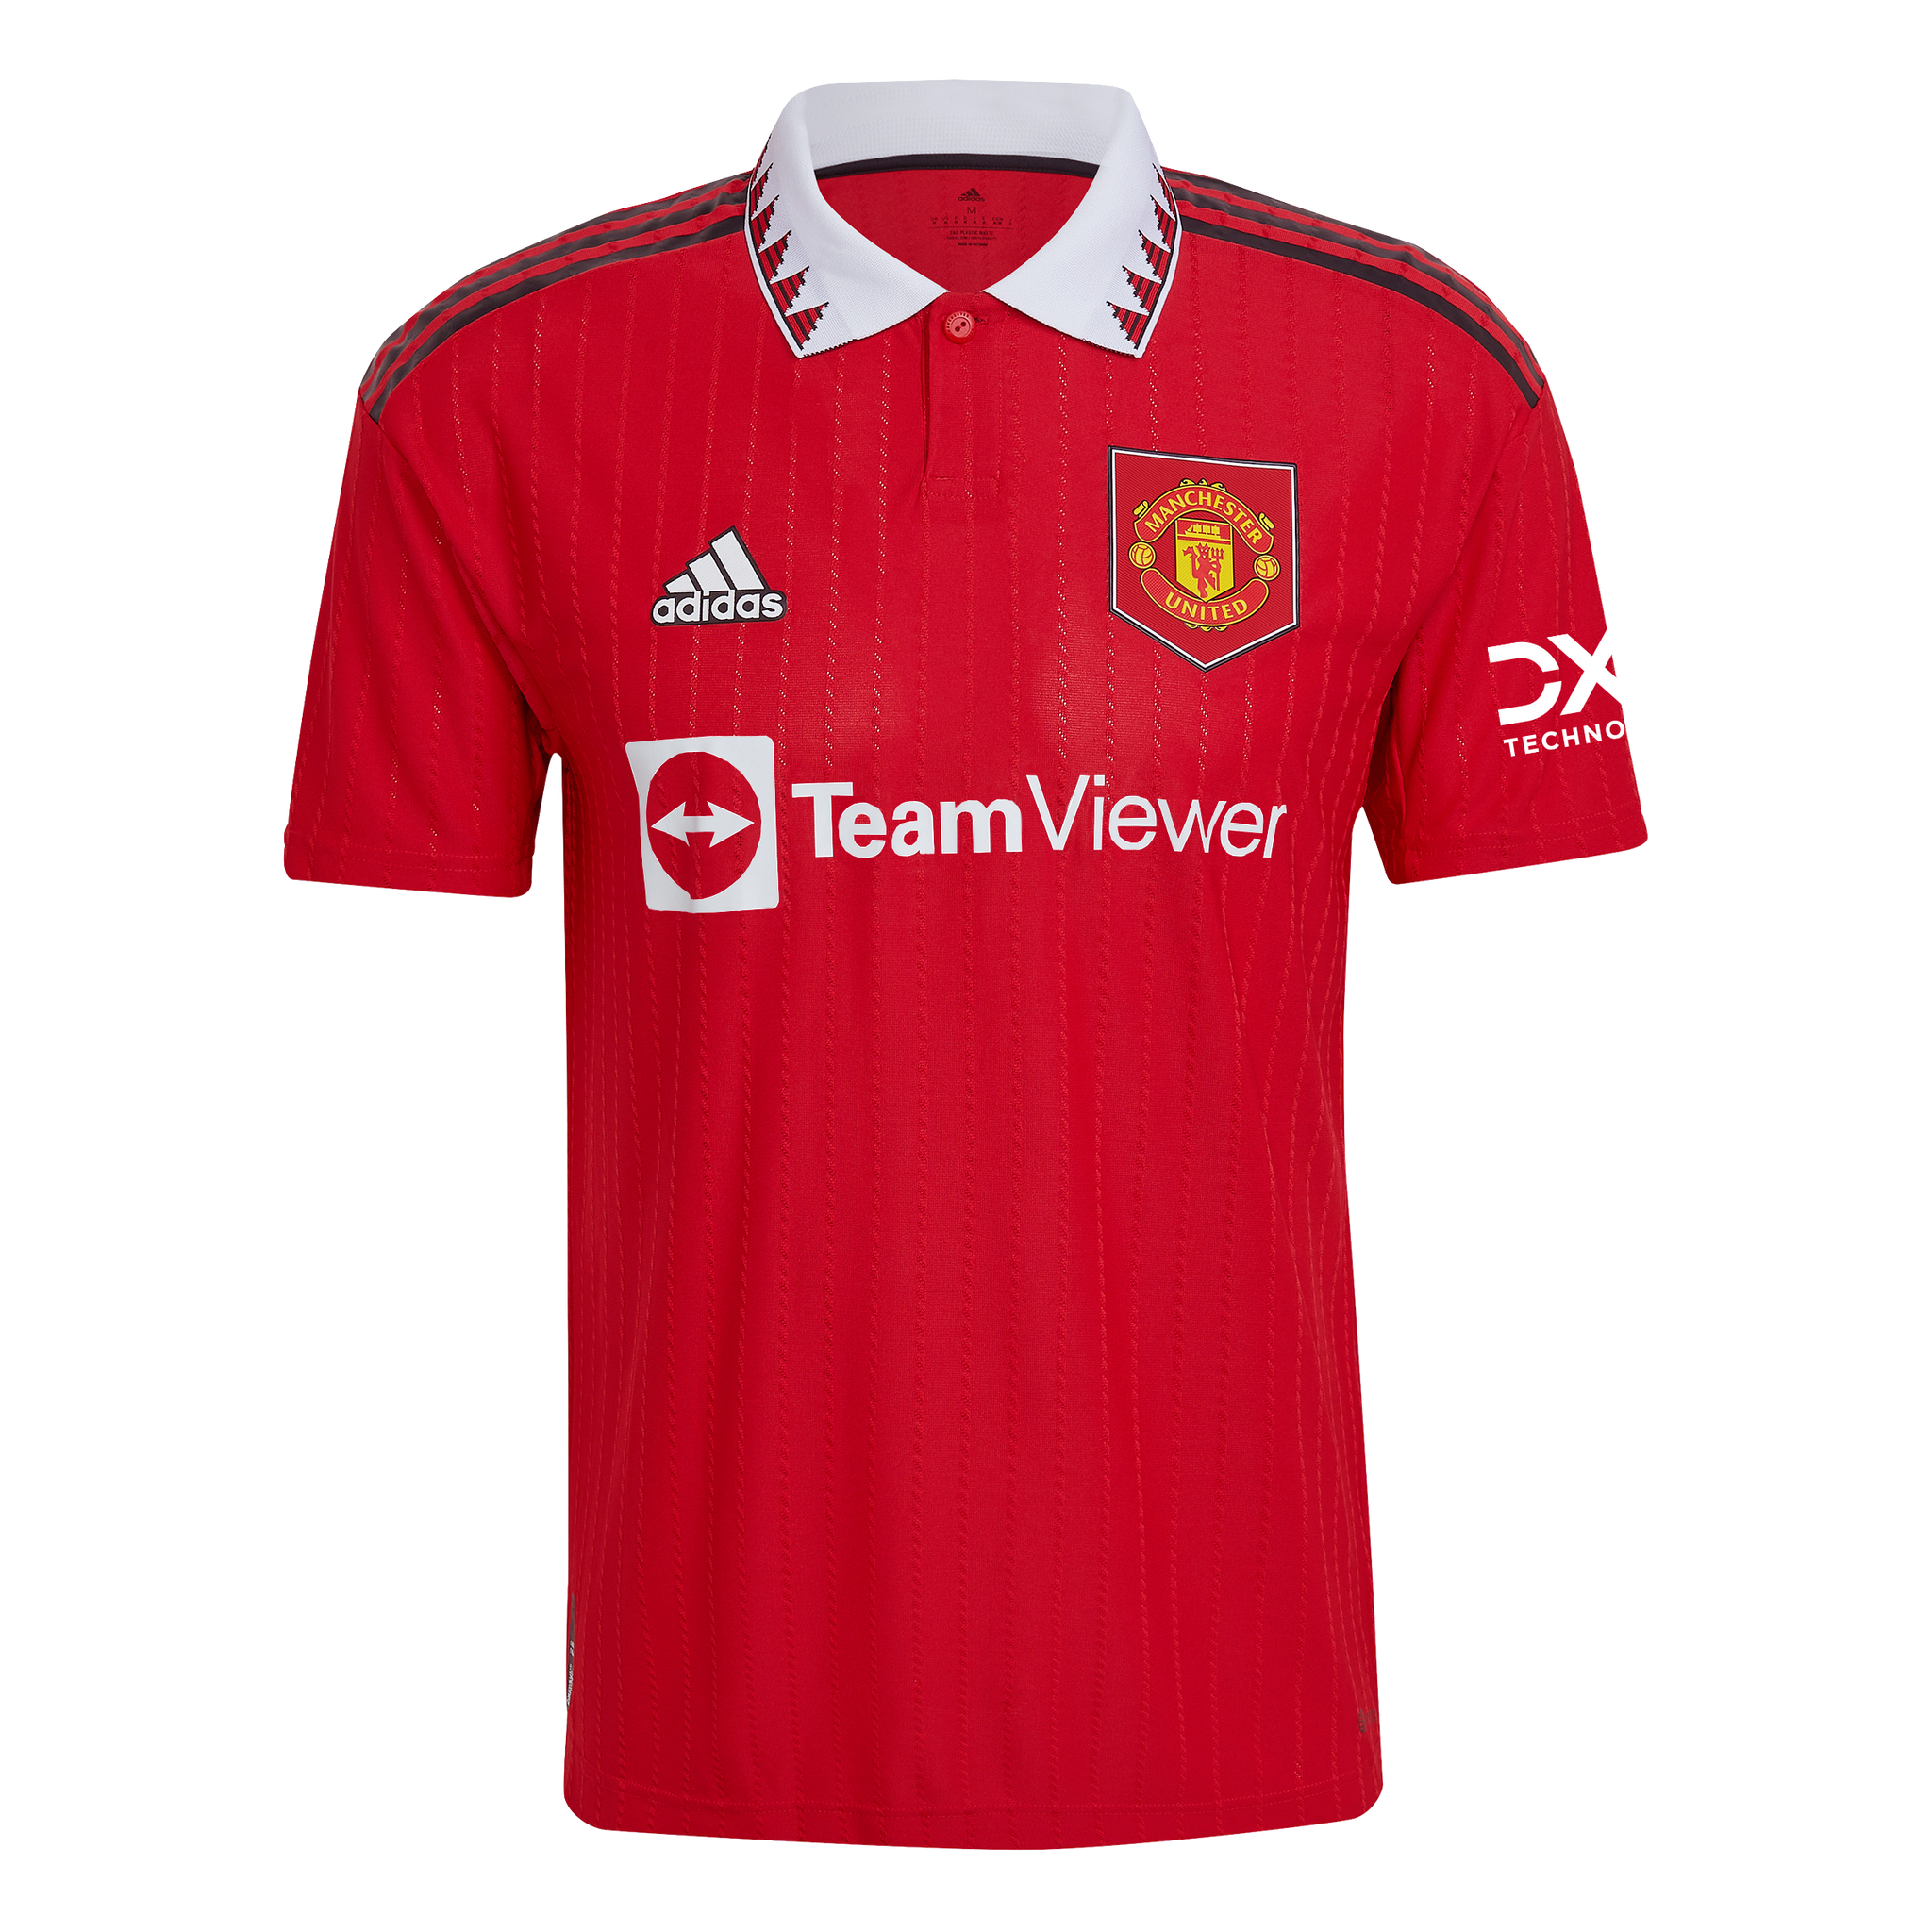 Adidas 22/23 Manchester United Home Jersey L / Red